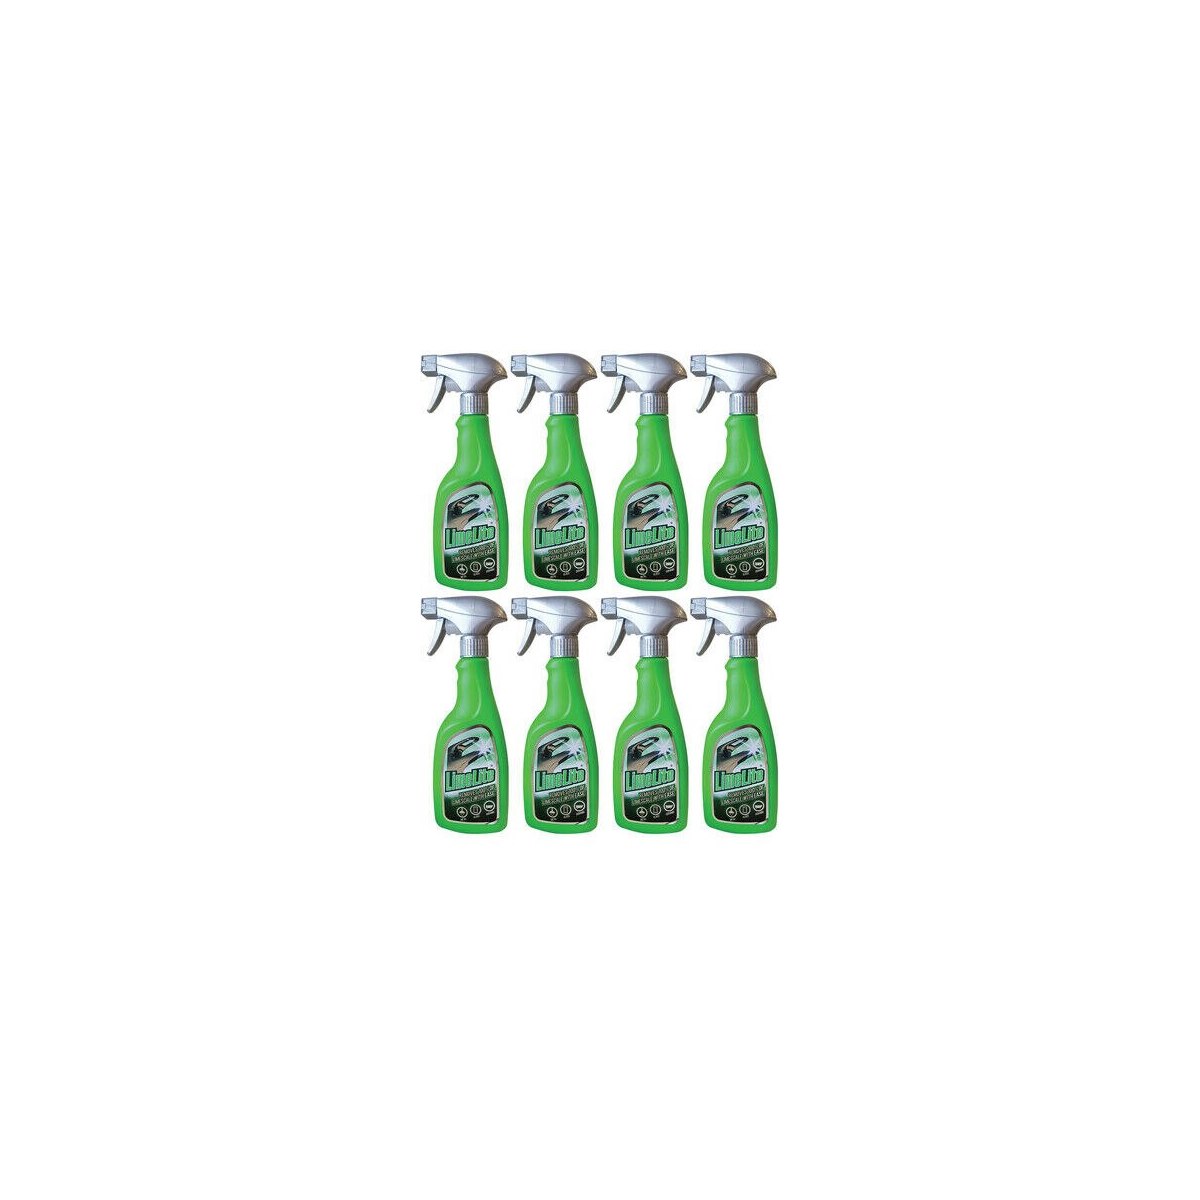 Case of 8 x Limelite Limescale Remover Spray 500ml